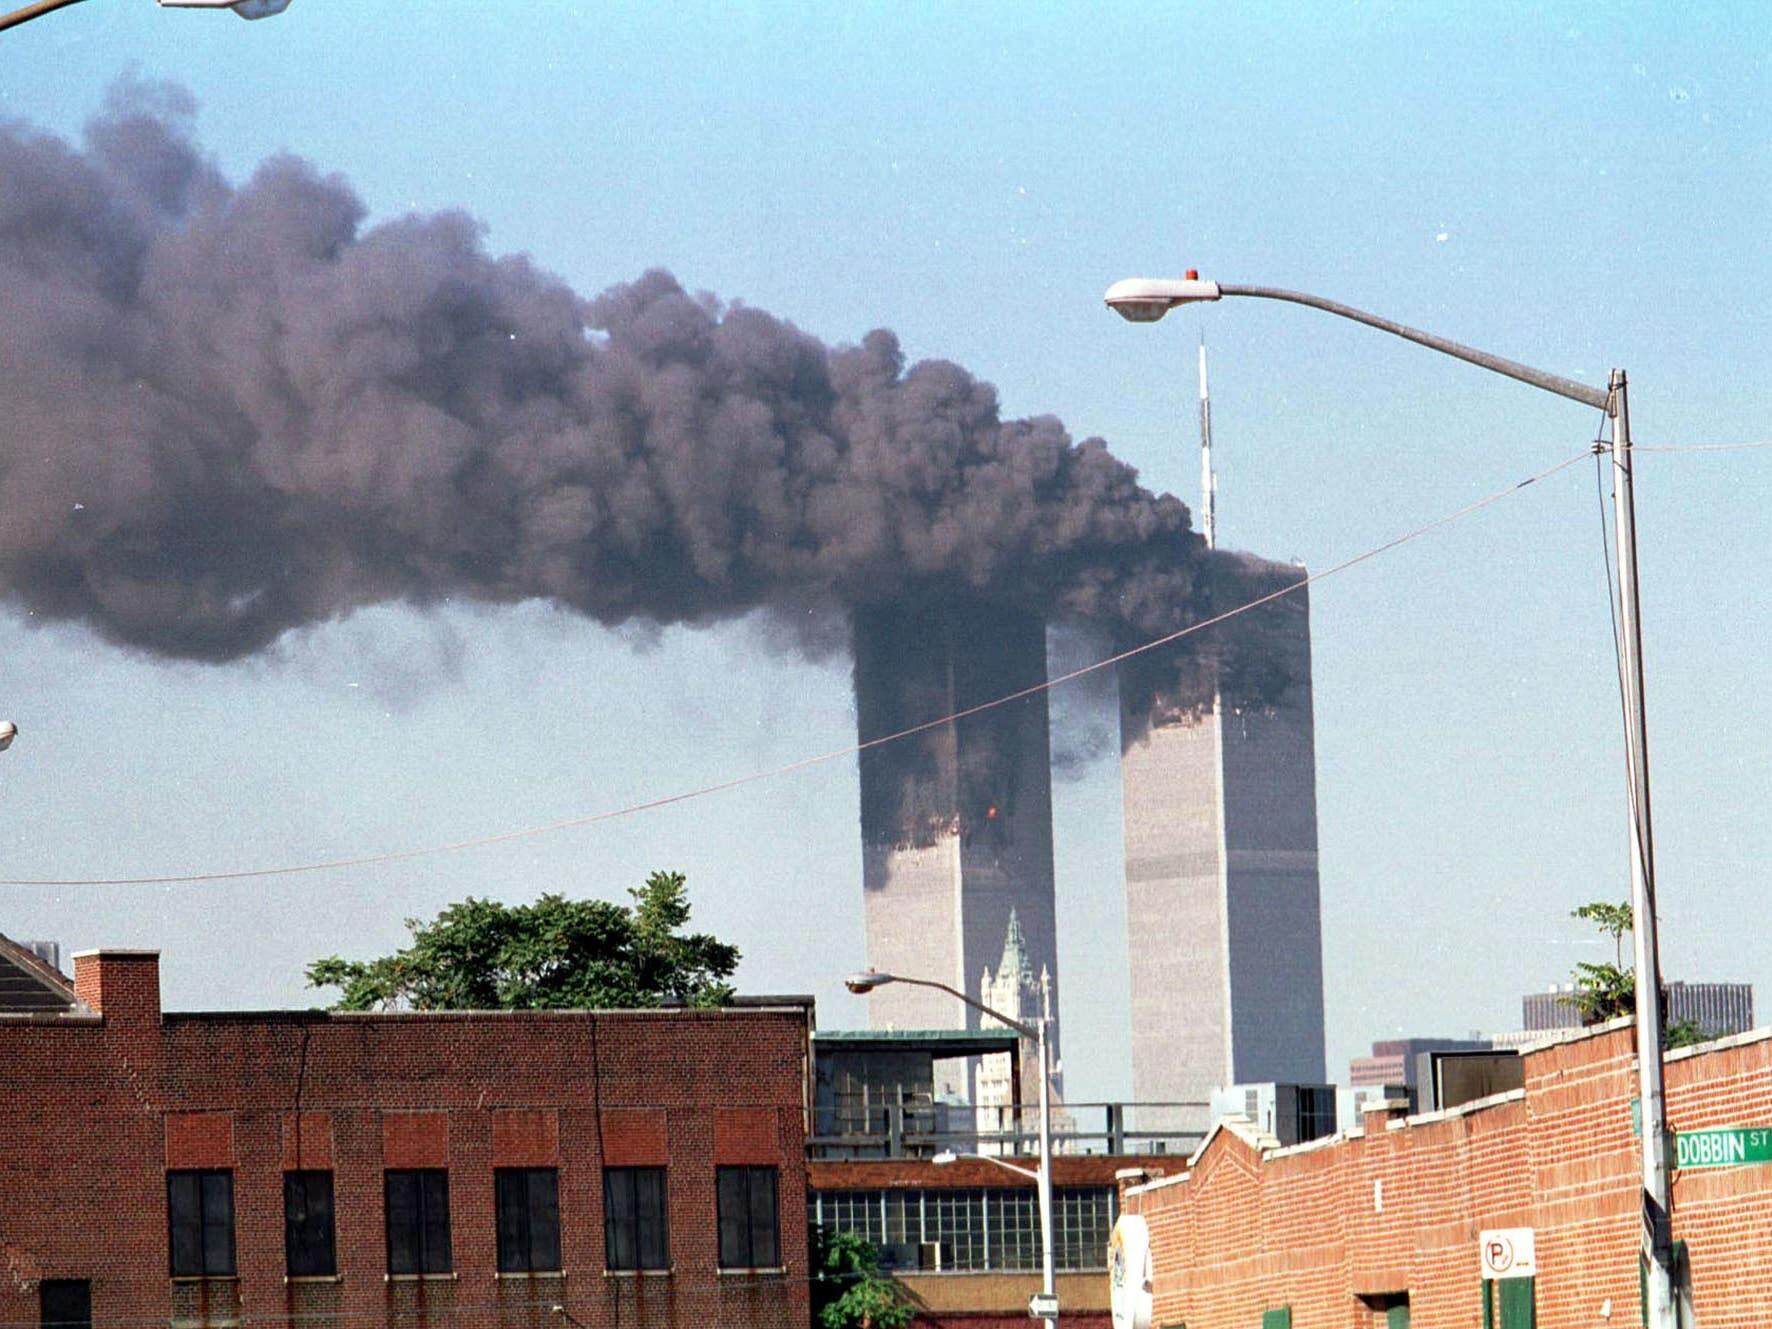 Fears of nuclear or chemical attack in NI following 9/11, archives reveal